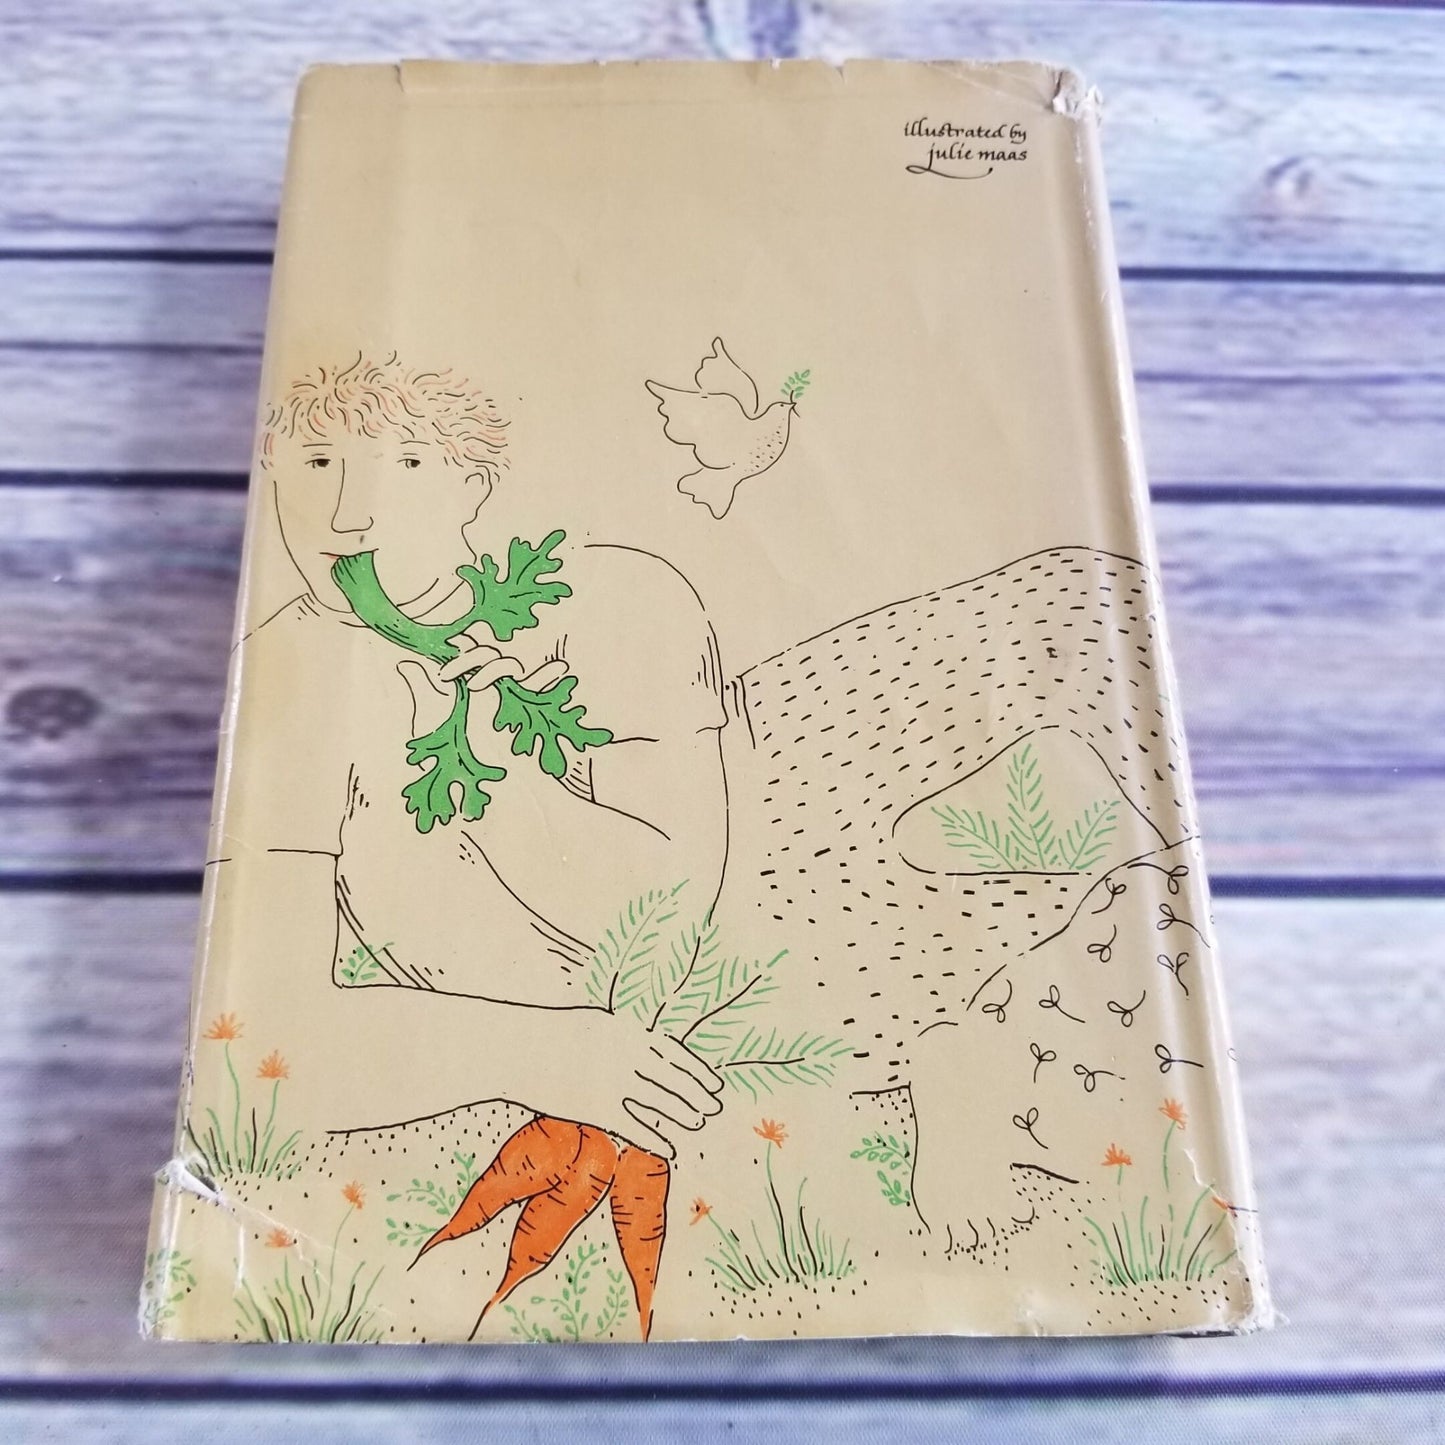 Vintage Vegetarian Cookbook The Vegetarian Epicure Recipes Vegetarian 1972 Hardcover WITH Dust Jacket Ann Thomas 262 Recipes